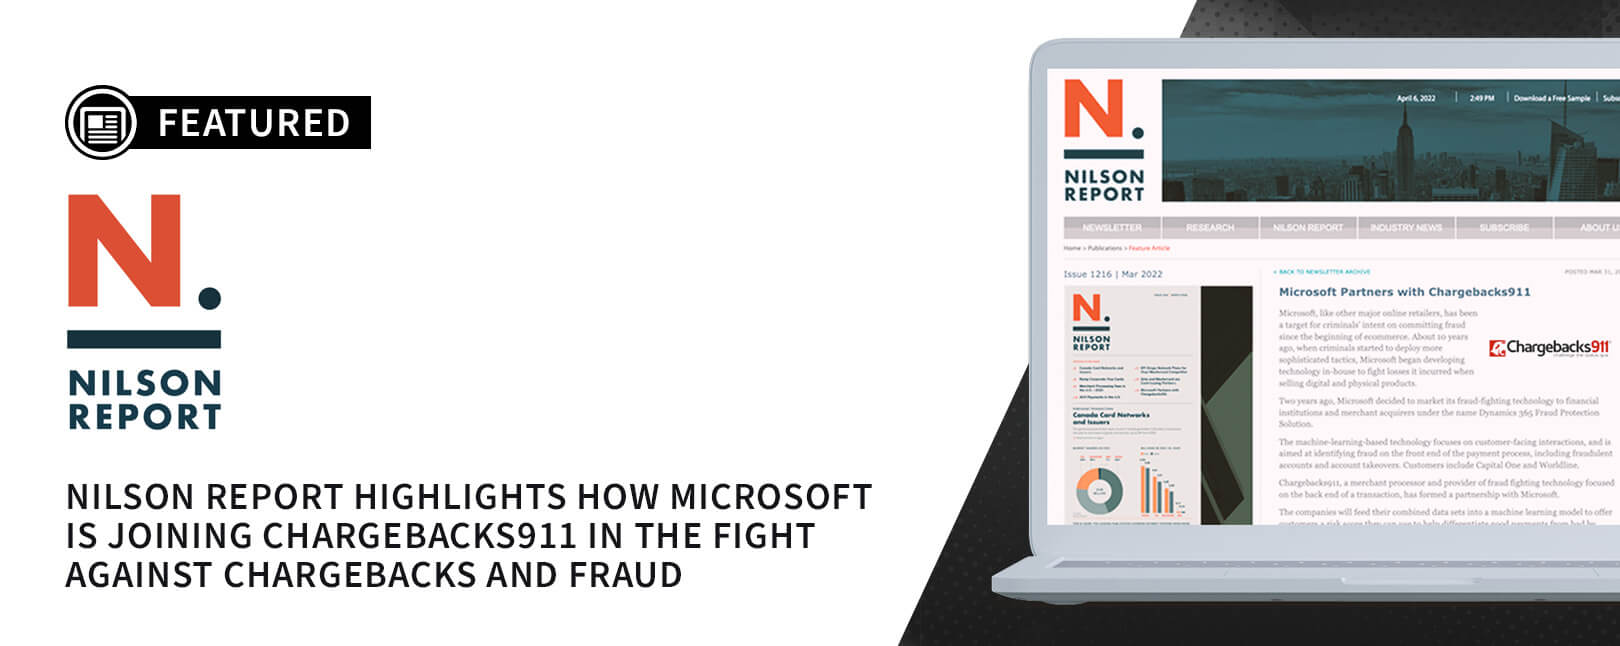 Chargebacks911® & Microsoft Partnership Featured in Nilson Report